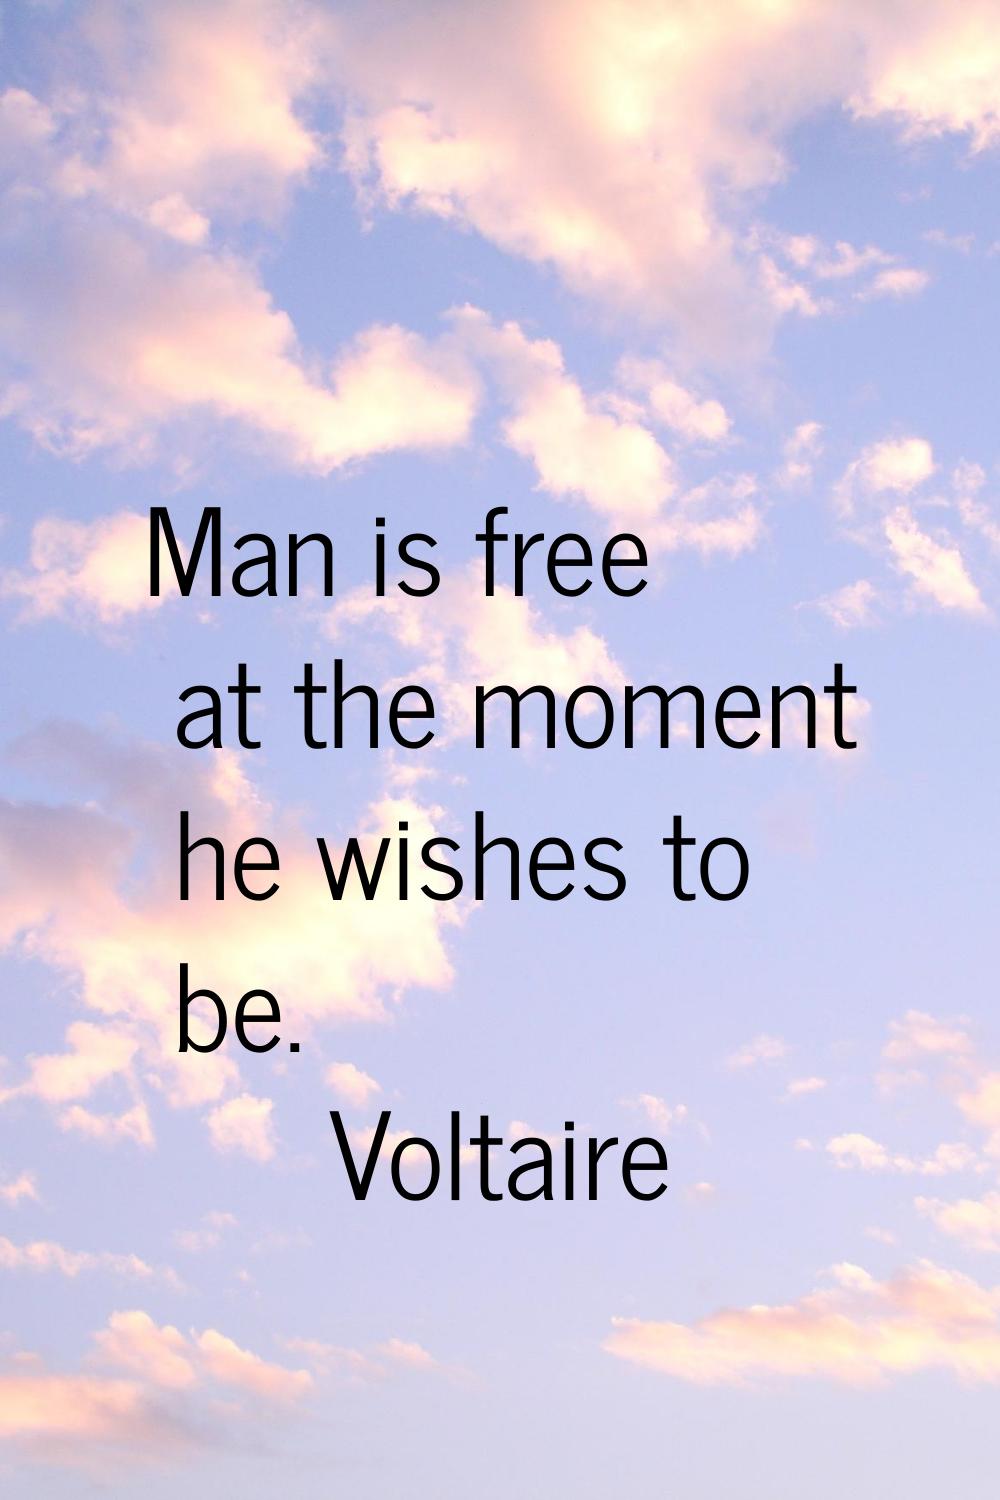 Man is free at the moment he wishes to be.